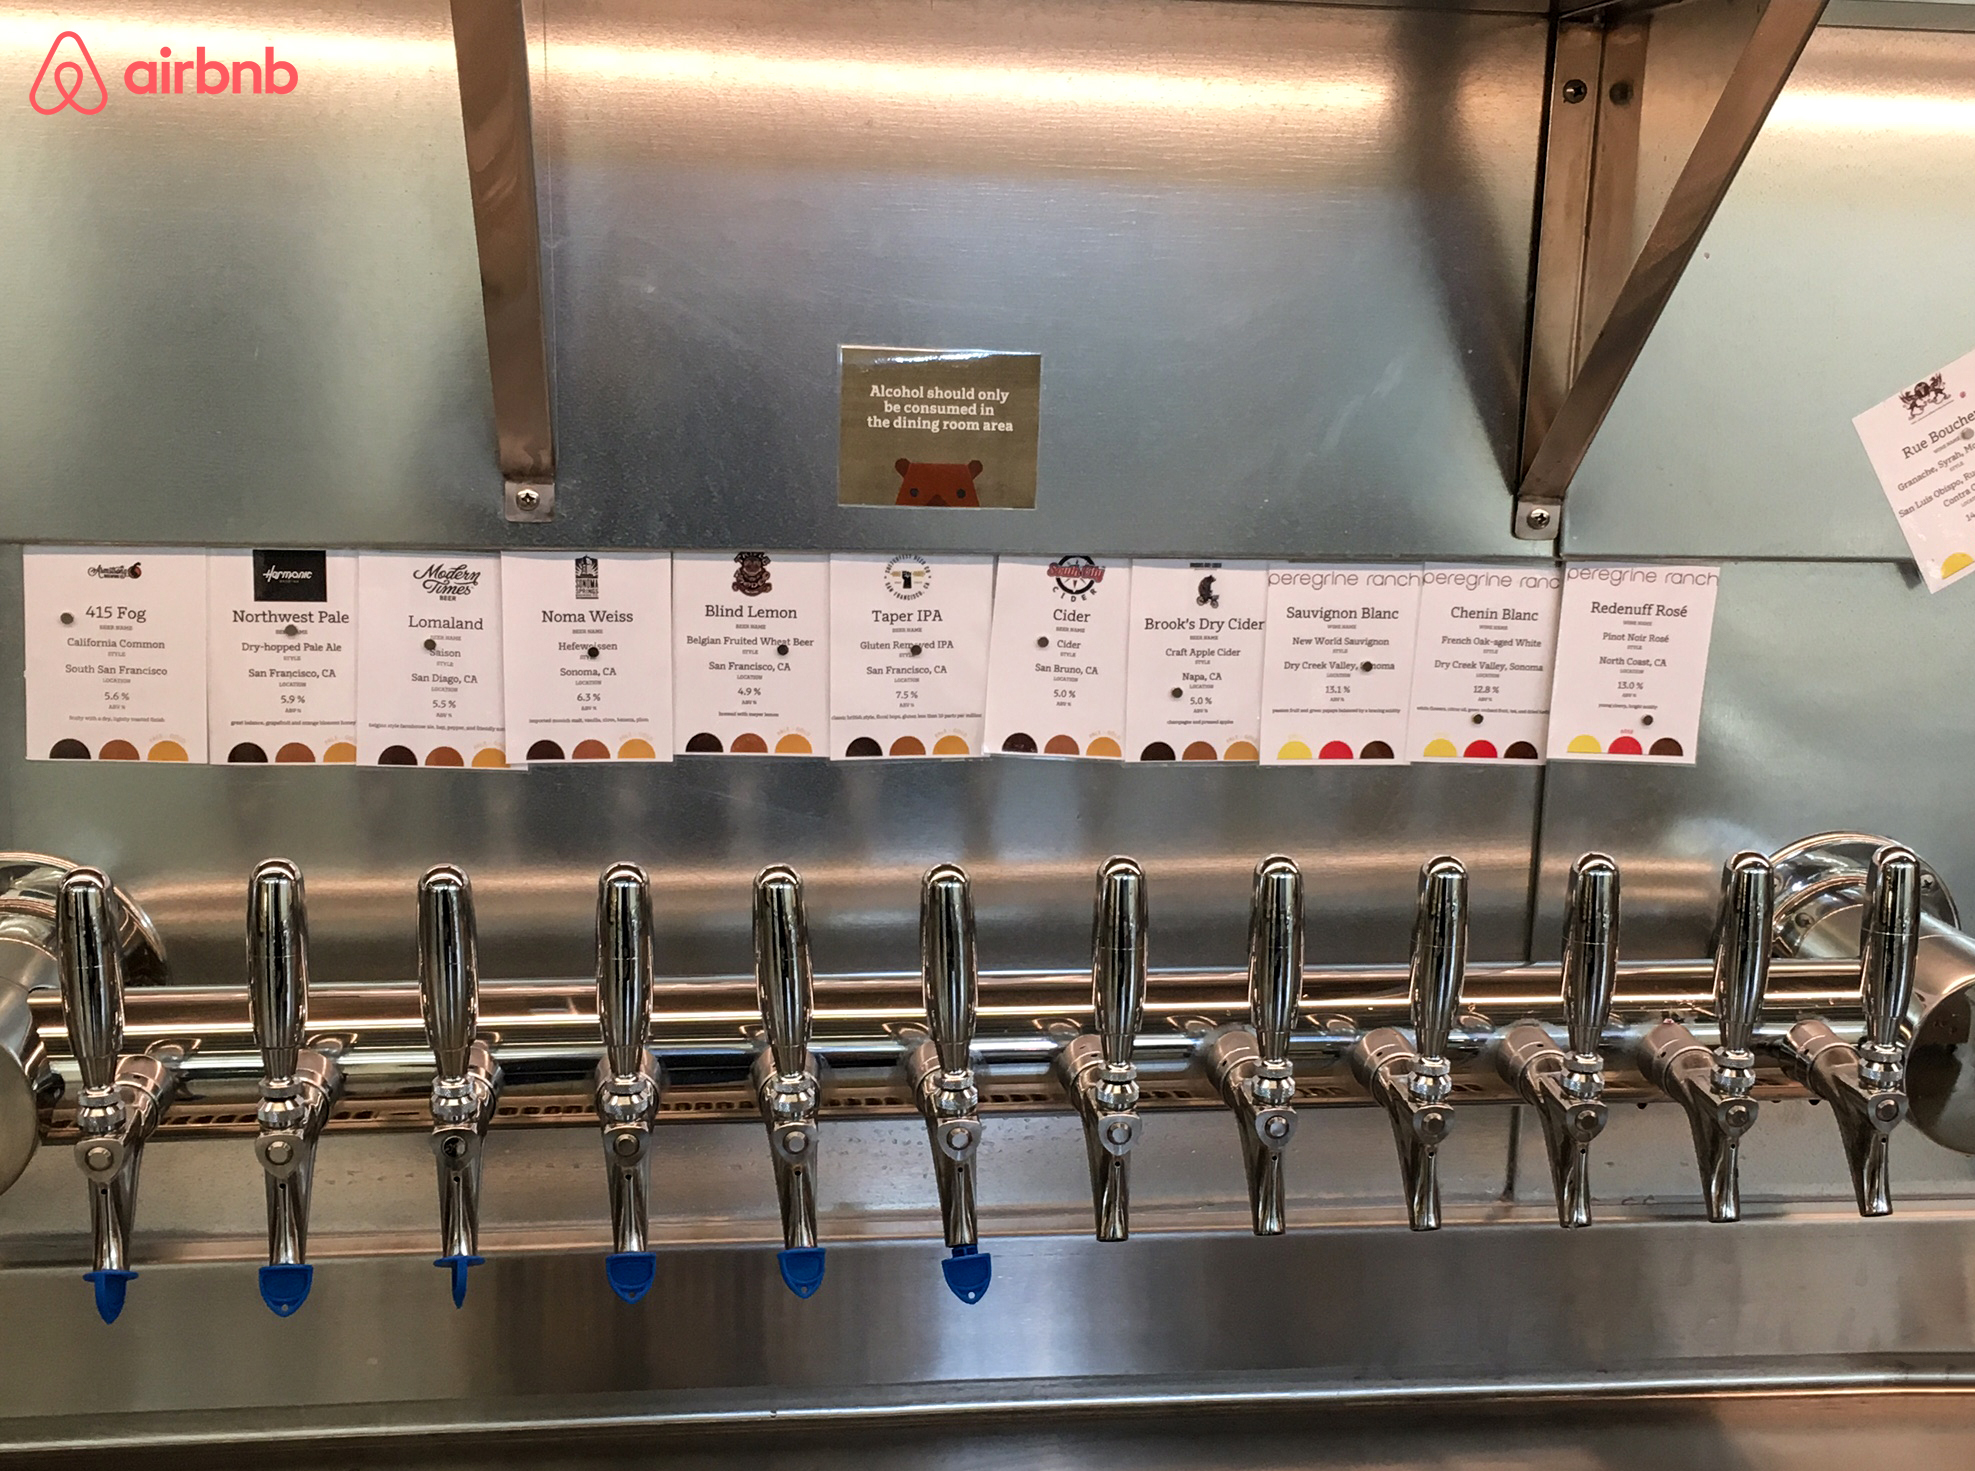 Airbnb's Beverages on Tap